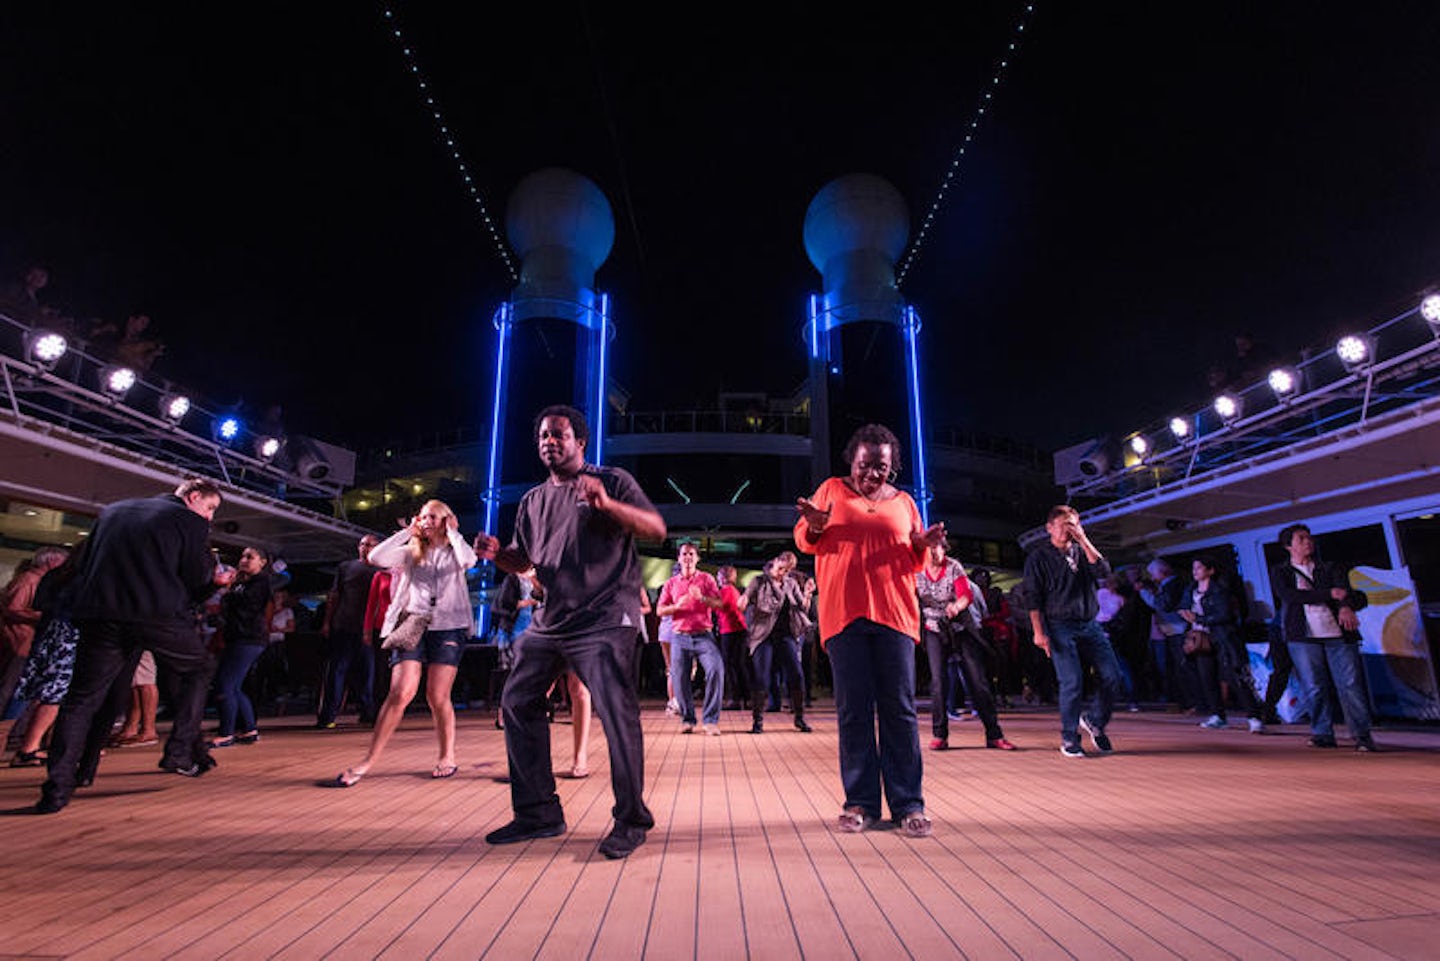 Sailaway Party on Norwegian Epic